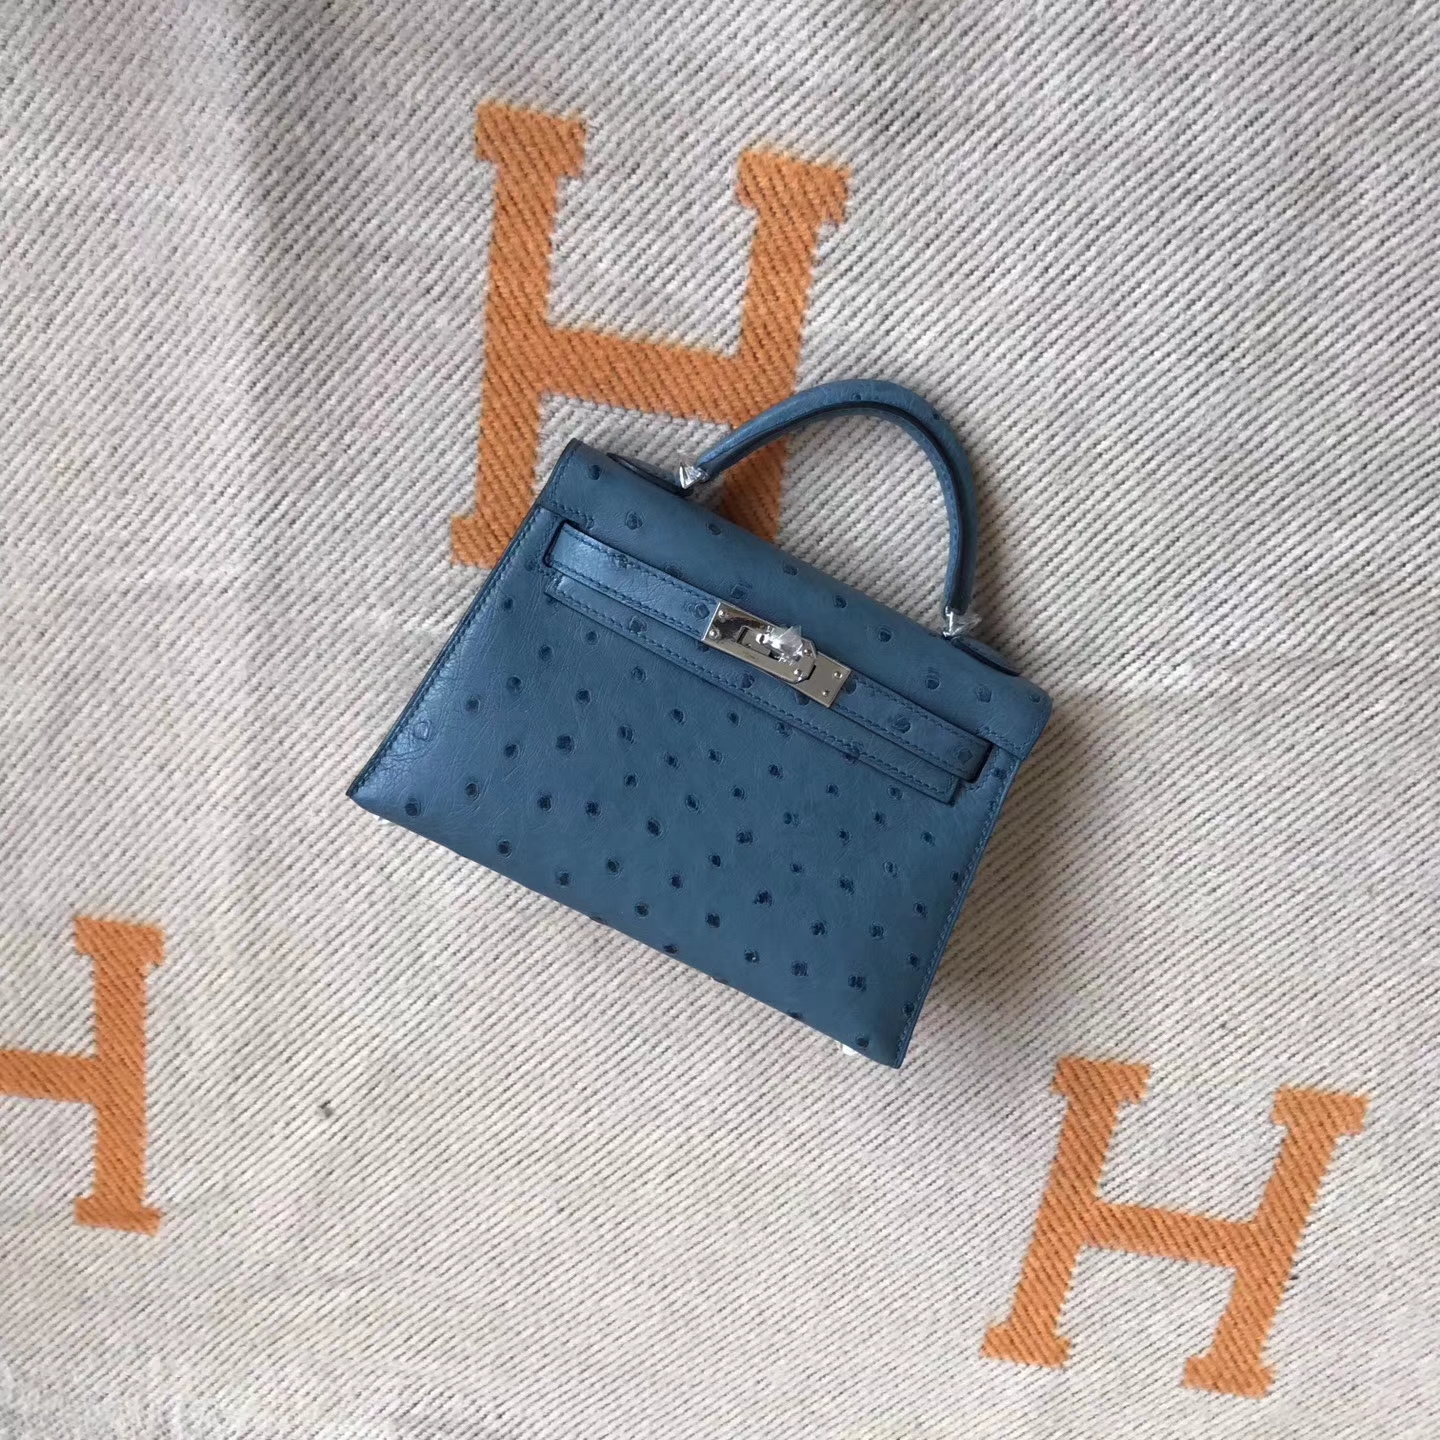 Sale Hermes Coral Blue Ostrich Leather Minikelly-2 Evening Bag19cm Silver Hardware